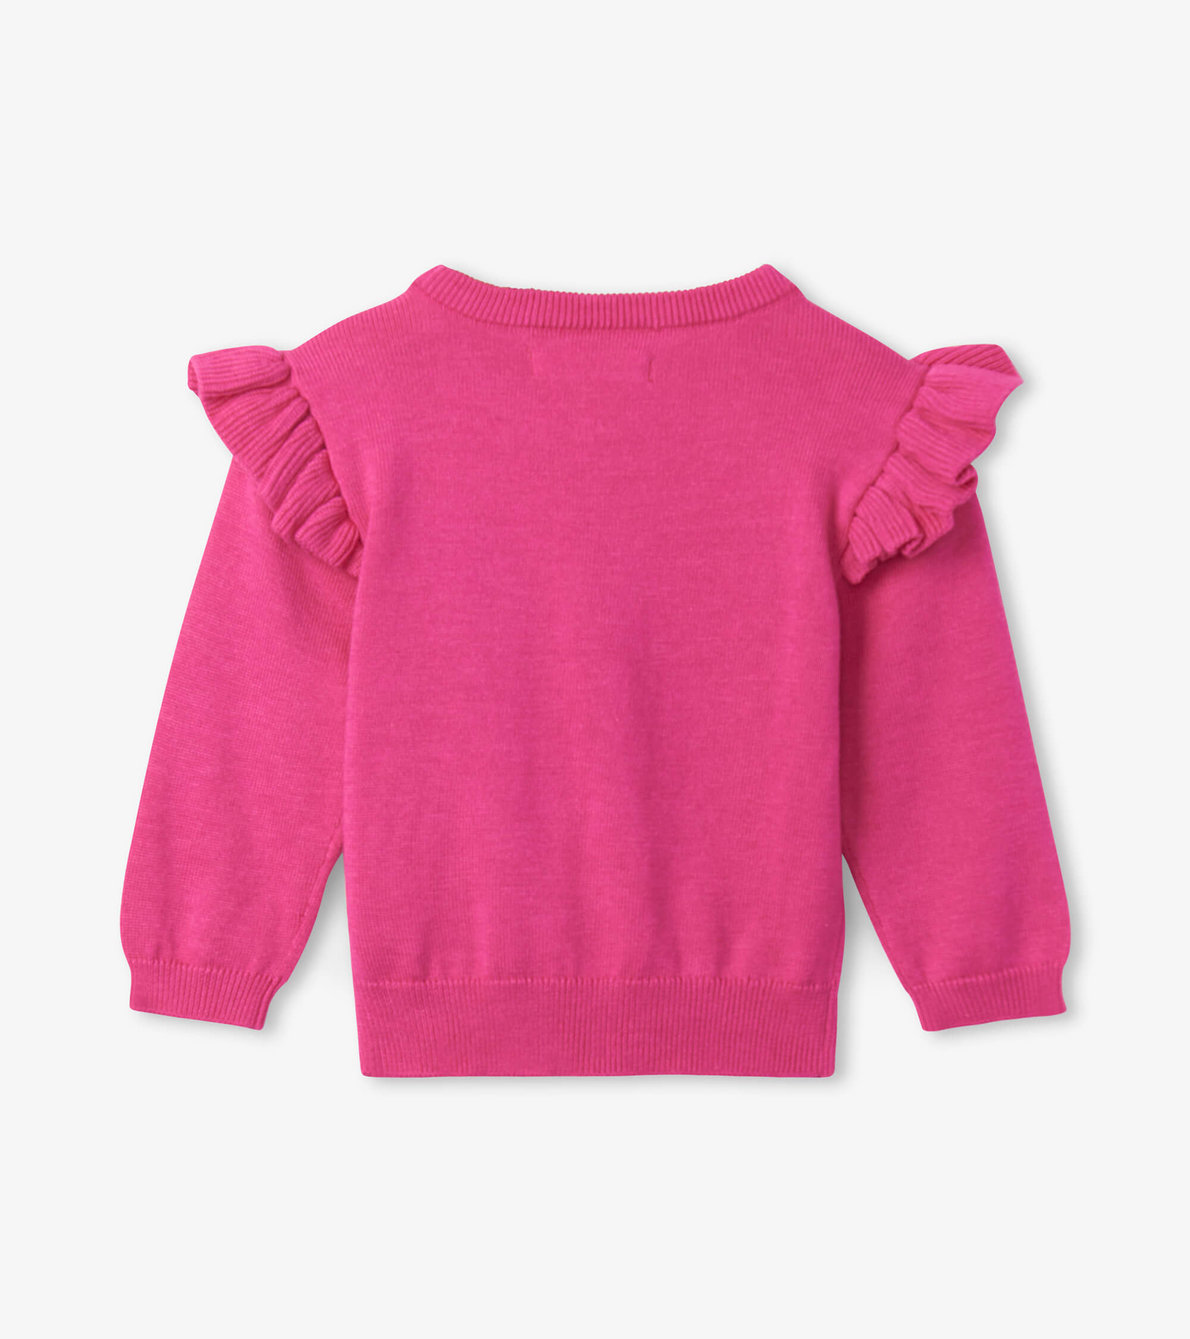 View larger image of Stripy Butterfly Baby Ruffle Sleeve Sweater